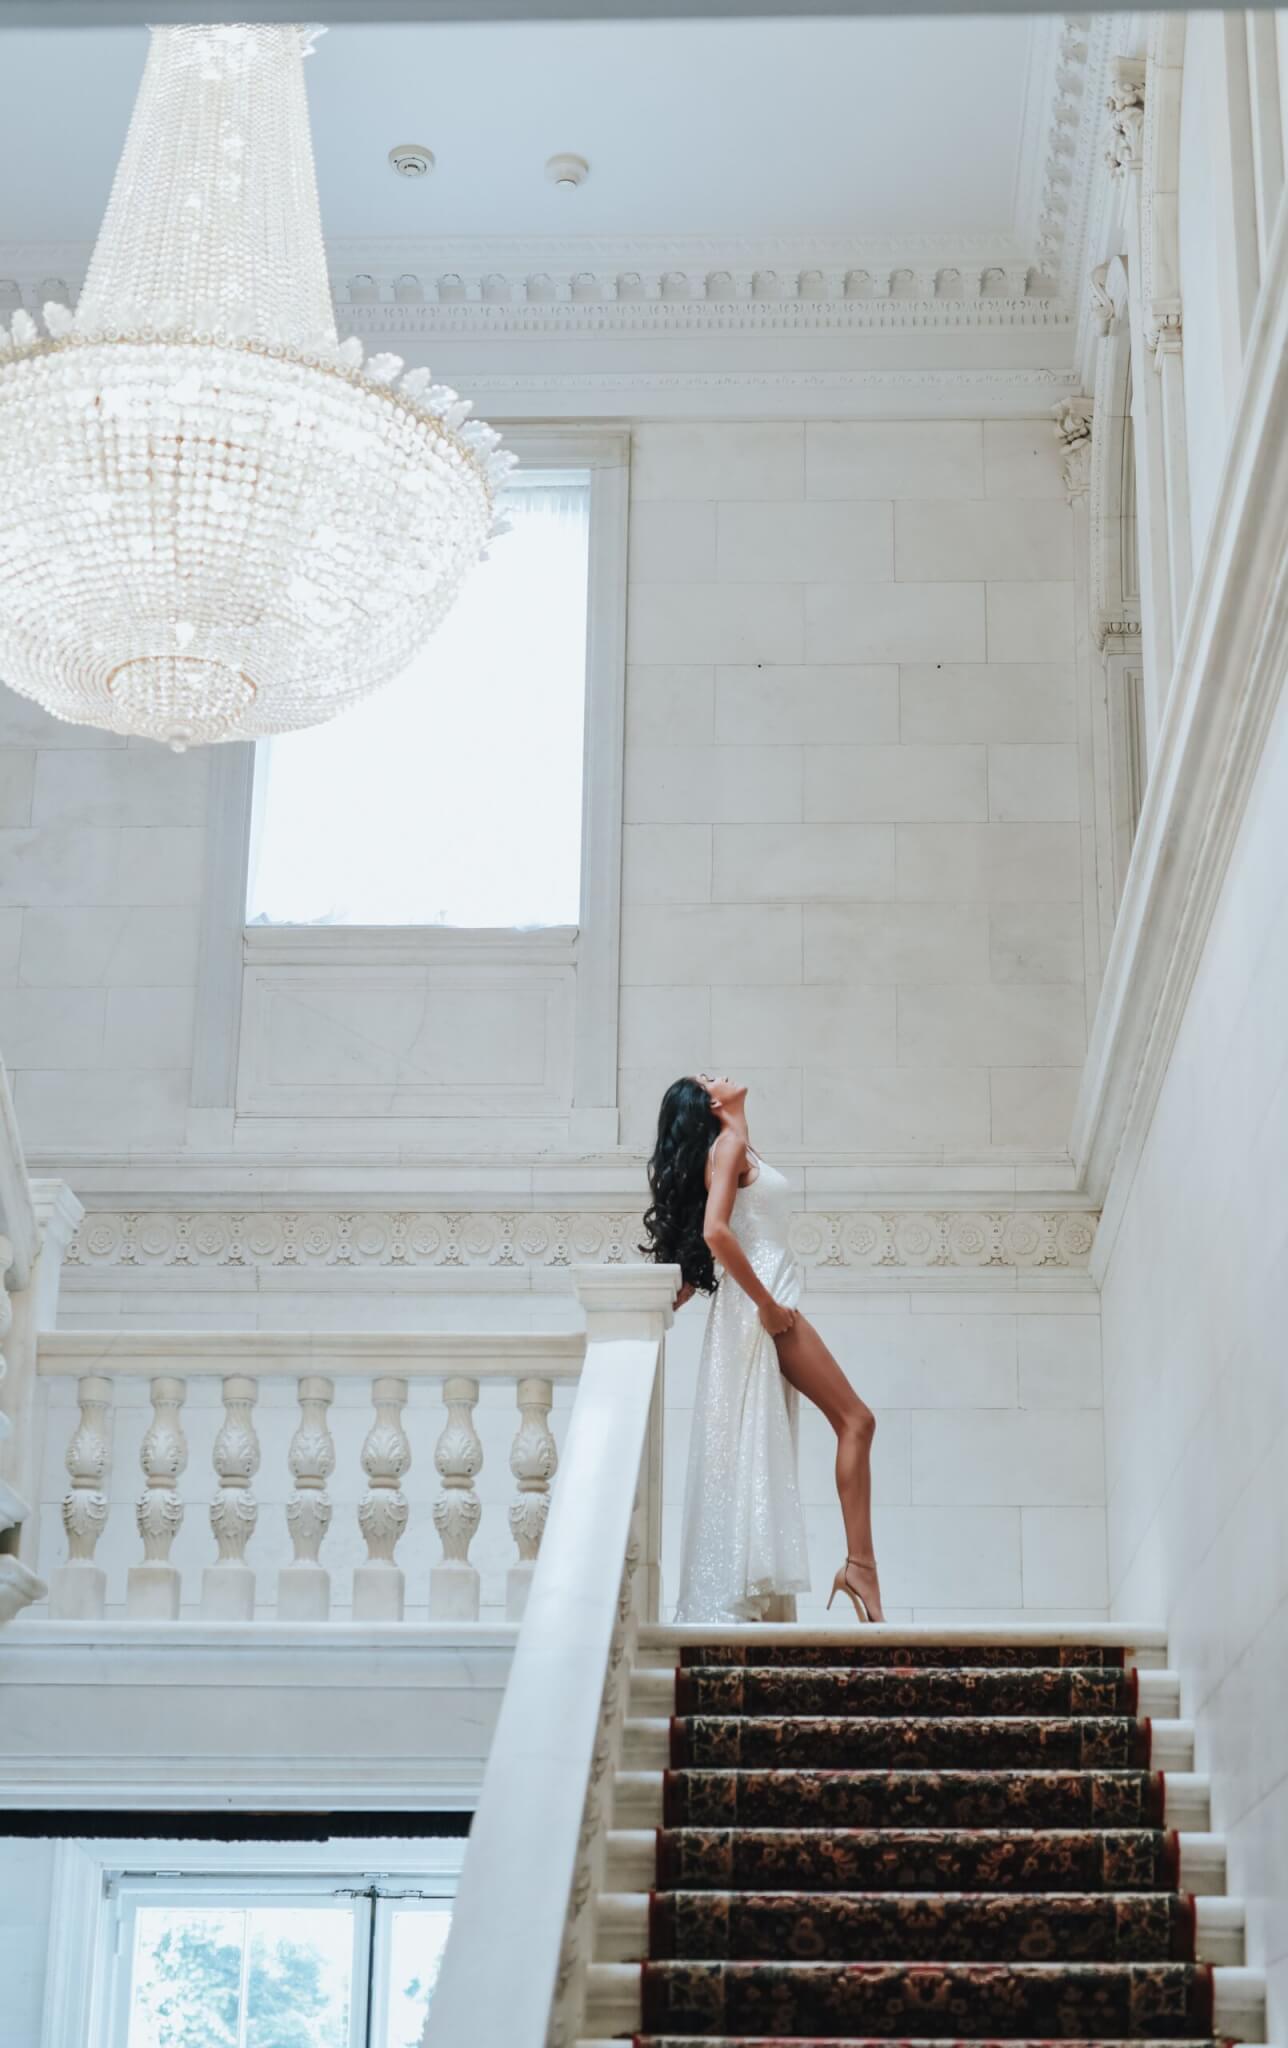 “Every single person is going to feel like a million dollars:” Spend a day in luxury at the de Seversky Mansion with the Alli Murphy Photography Experience